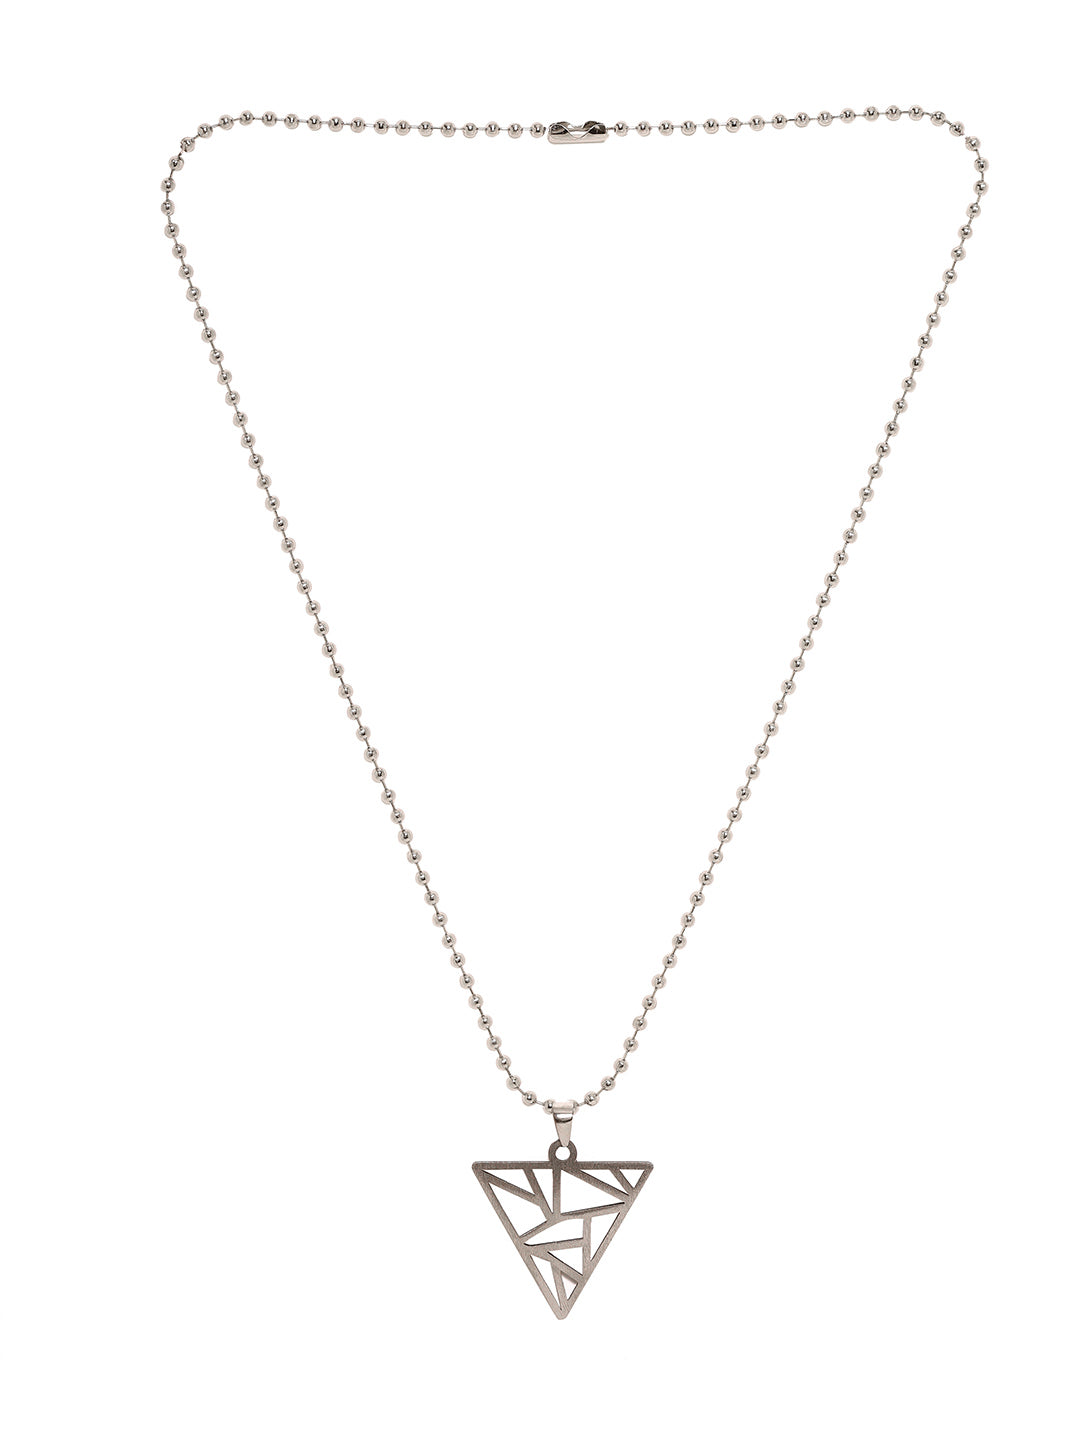 Bold by Priyaasi A Stylish Accent for Modern Elegance with Silver-Plated Men's Triangle Pendant on Chain